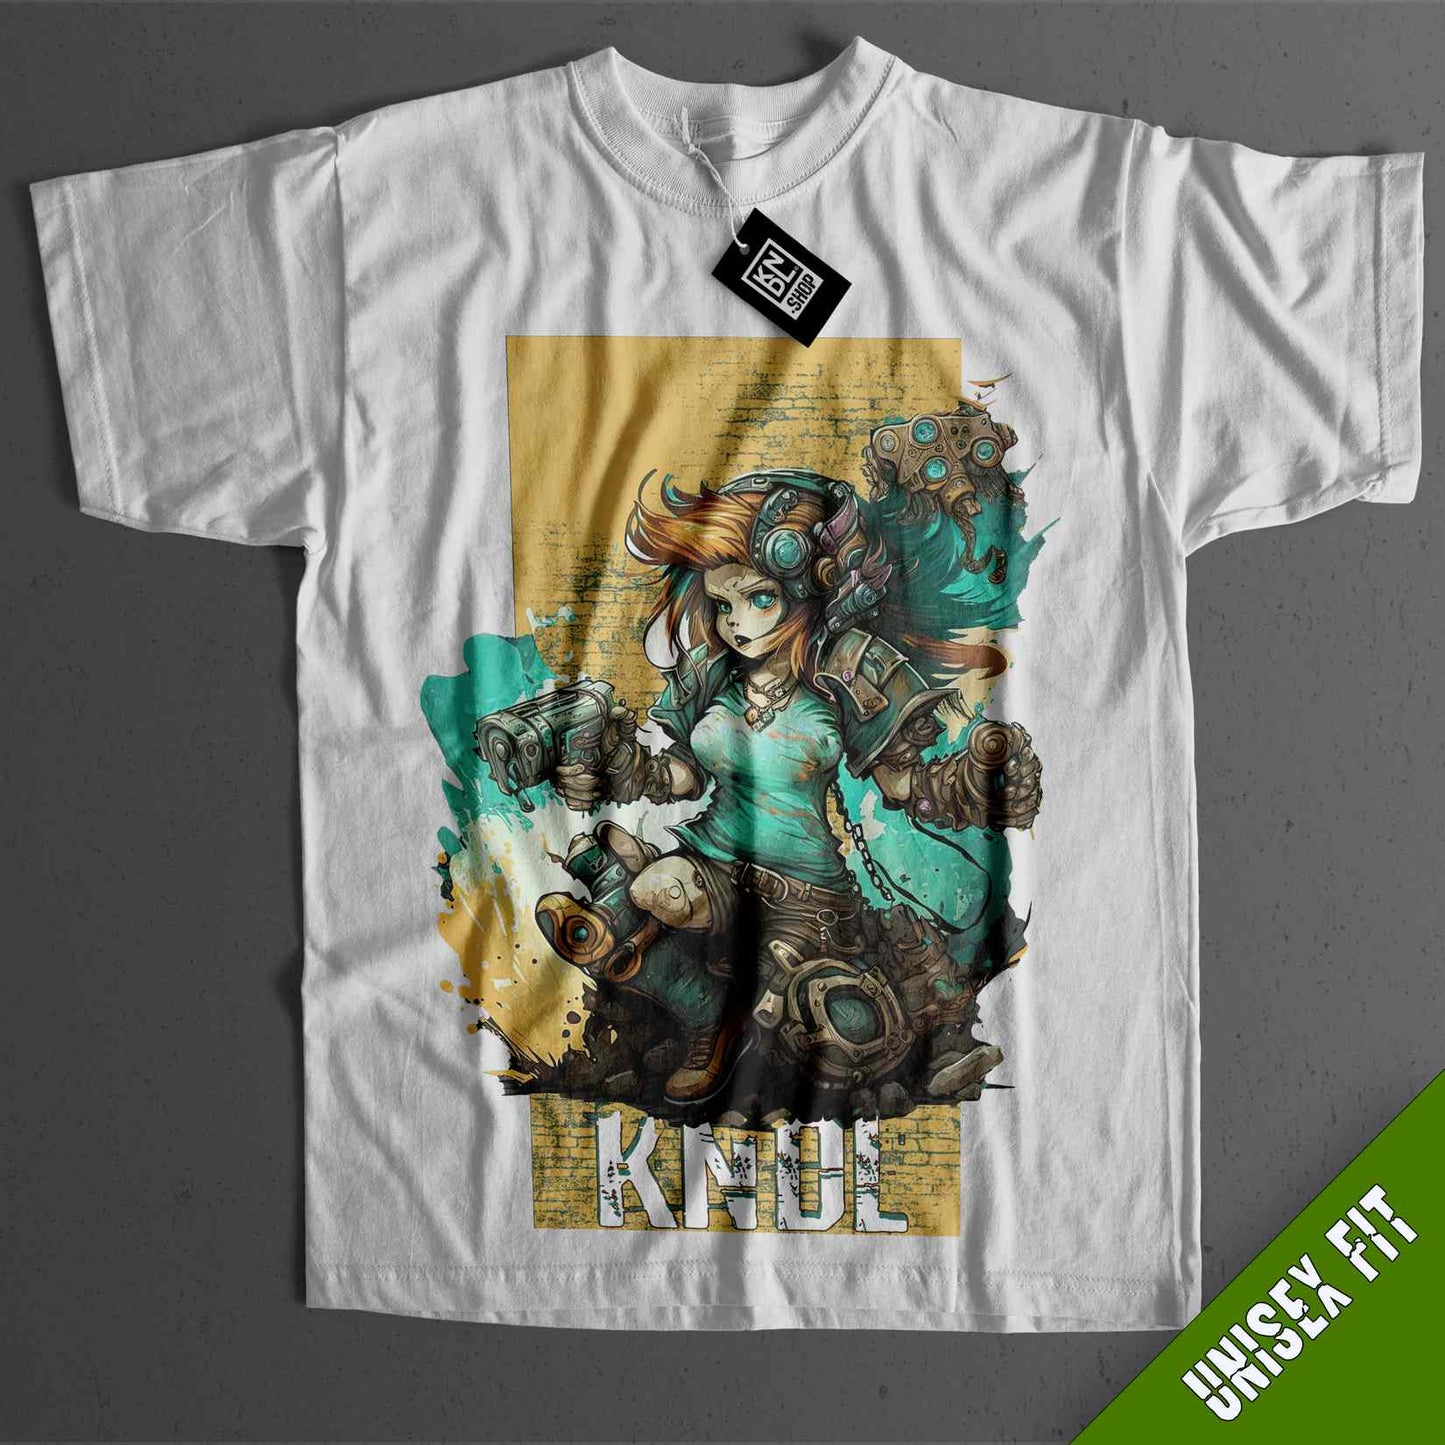 a t - shirt with an image of a woman holding a sword